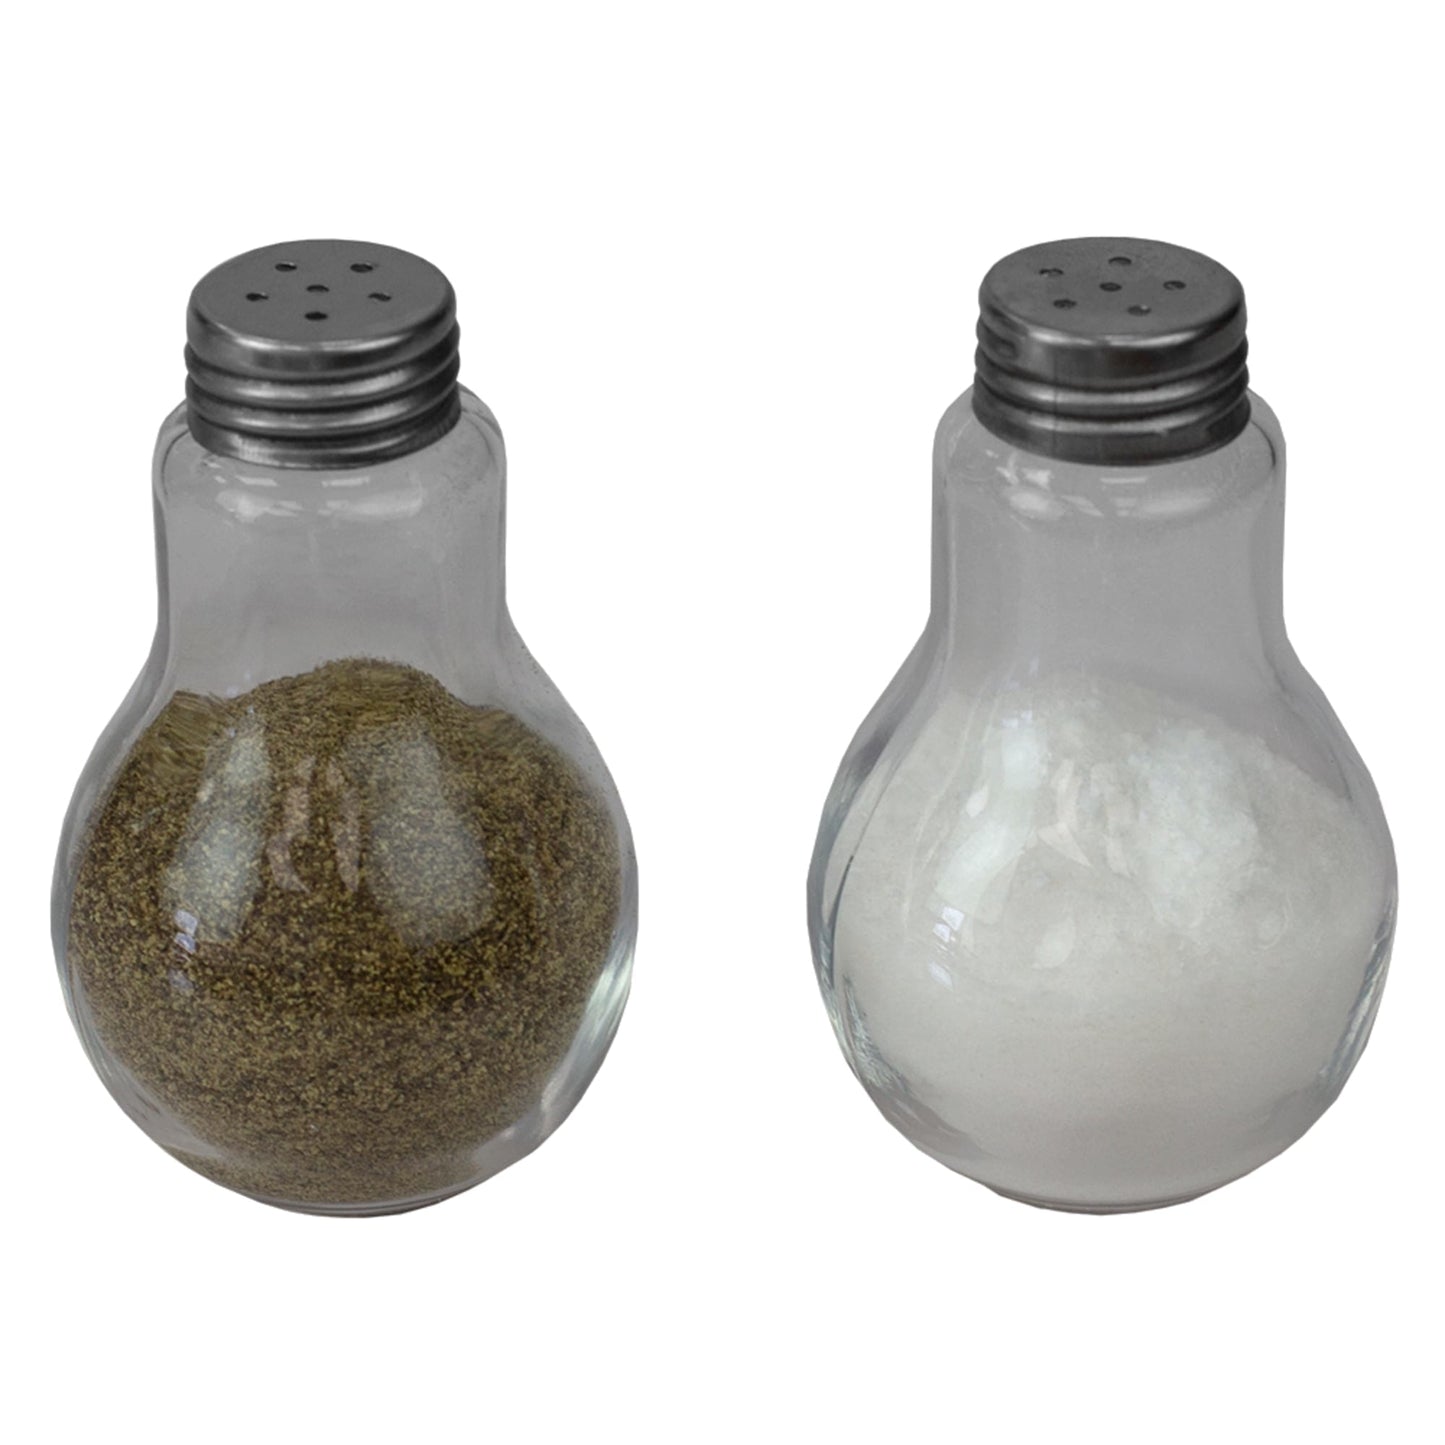 3.8 oz. Bulb Shape Glass Tabletop Salt and Pepper Shaker with Perforated Stainless Steel Tops, Clear